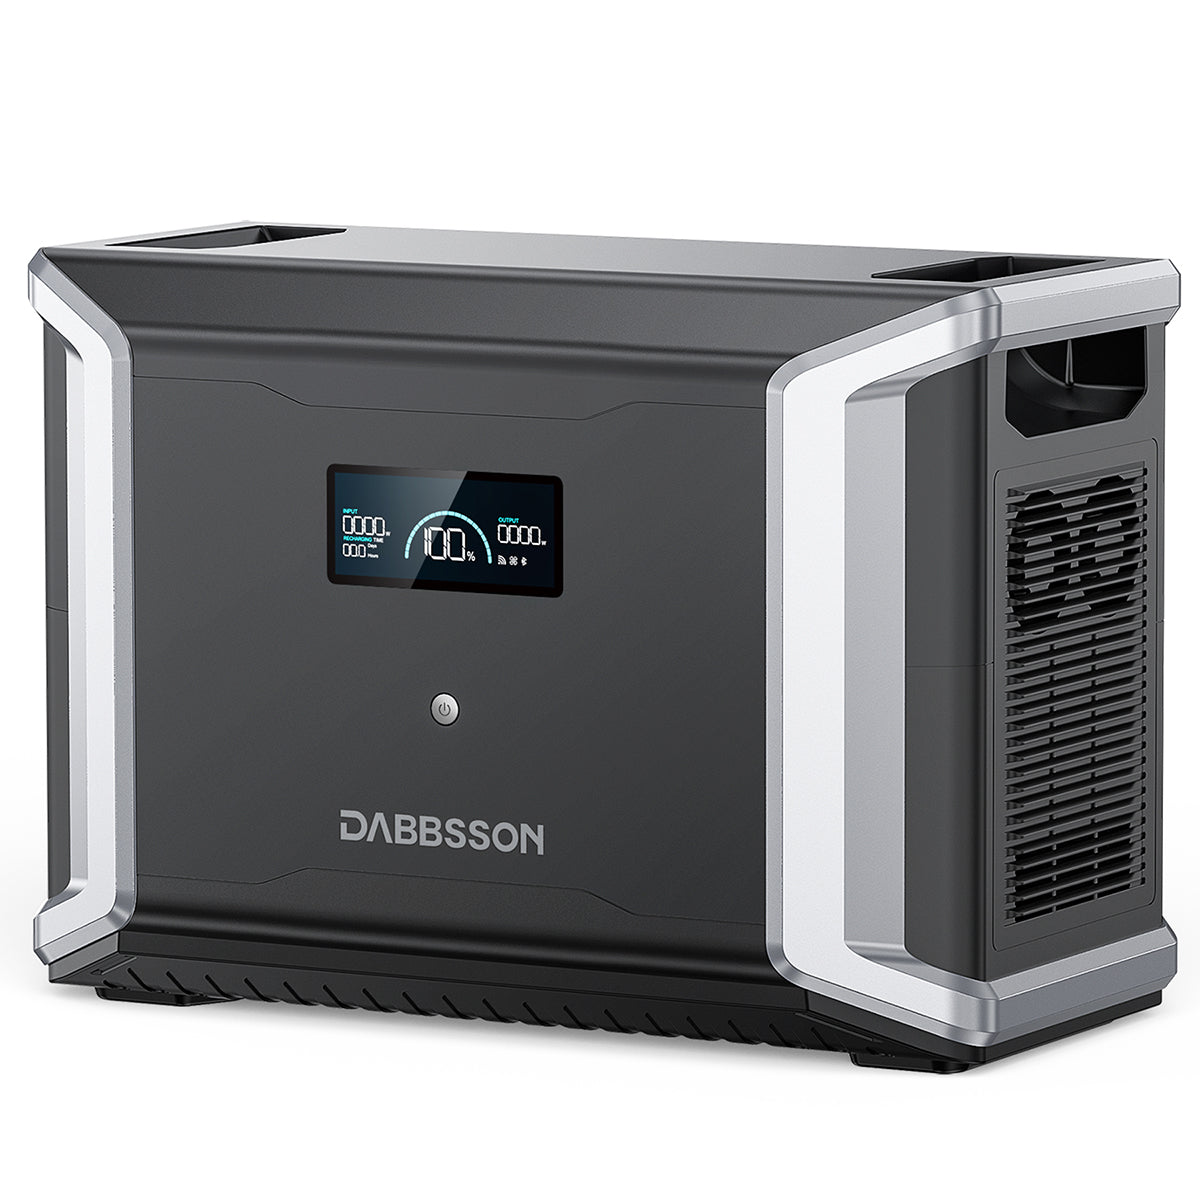 Dabbsson DBS2300 Solargenerator - 2330Wh | 2200W